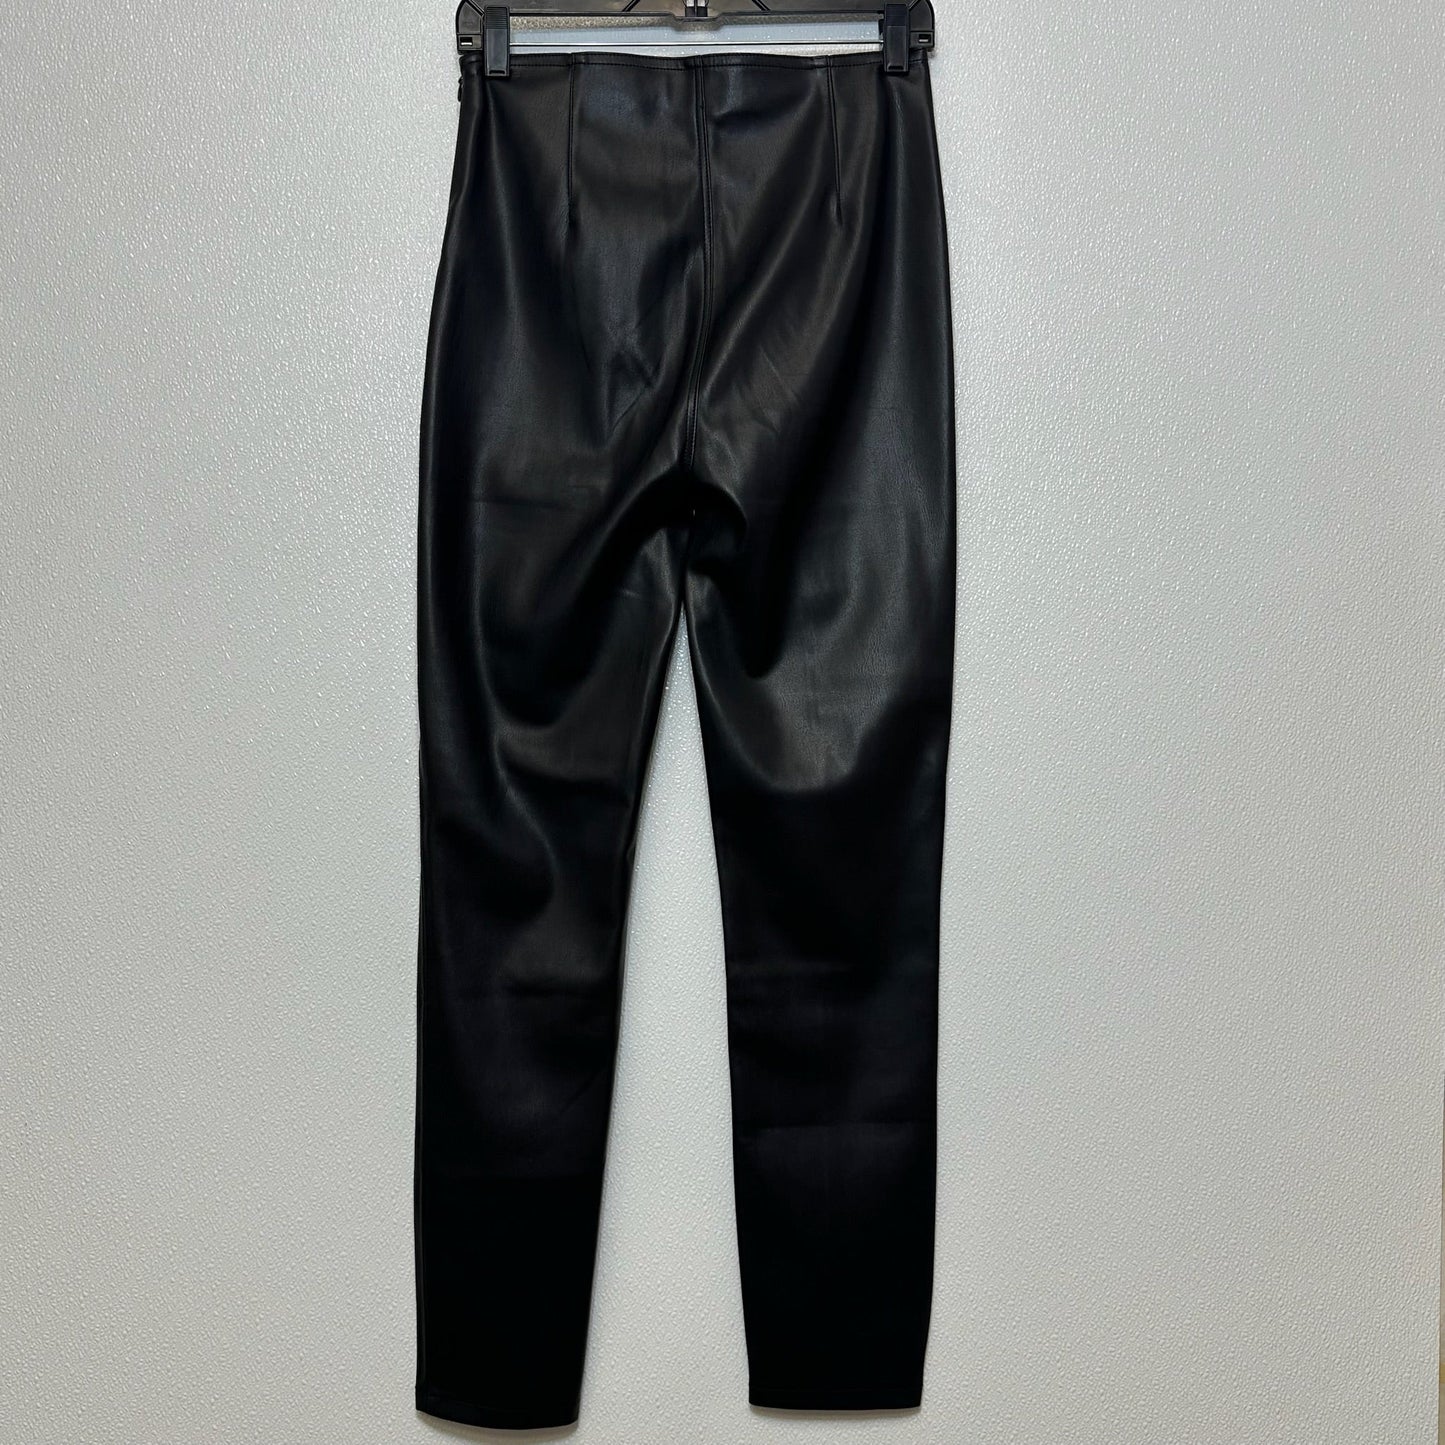 Black Pants Ankle We The Free, Size 4